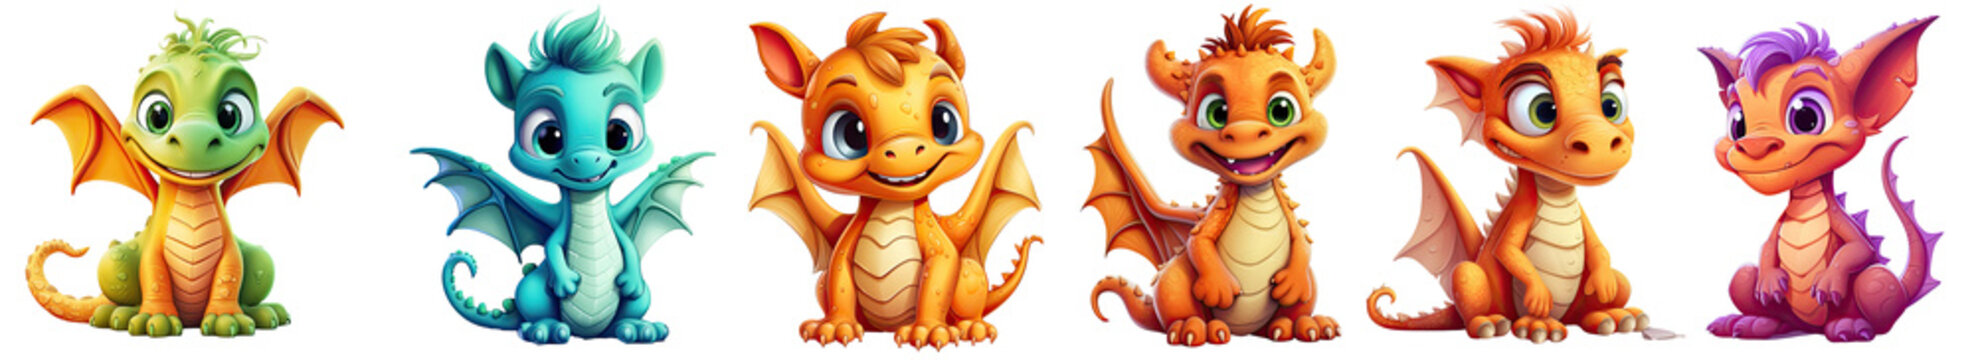 Cute cartoon baby dragon Cartoon character collection isolated on transparent background